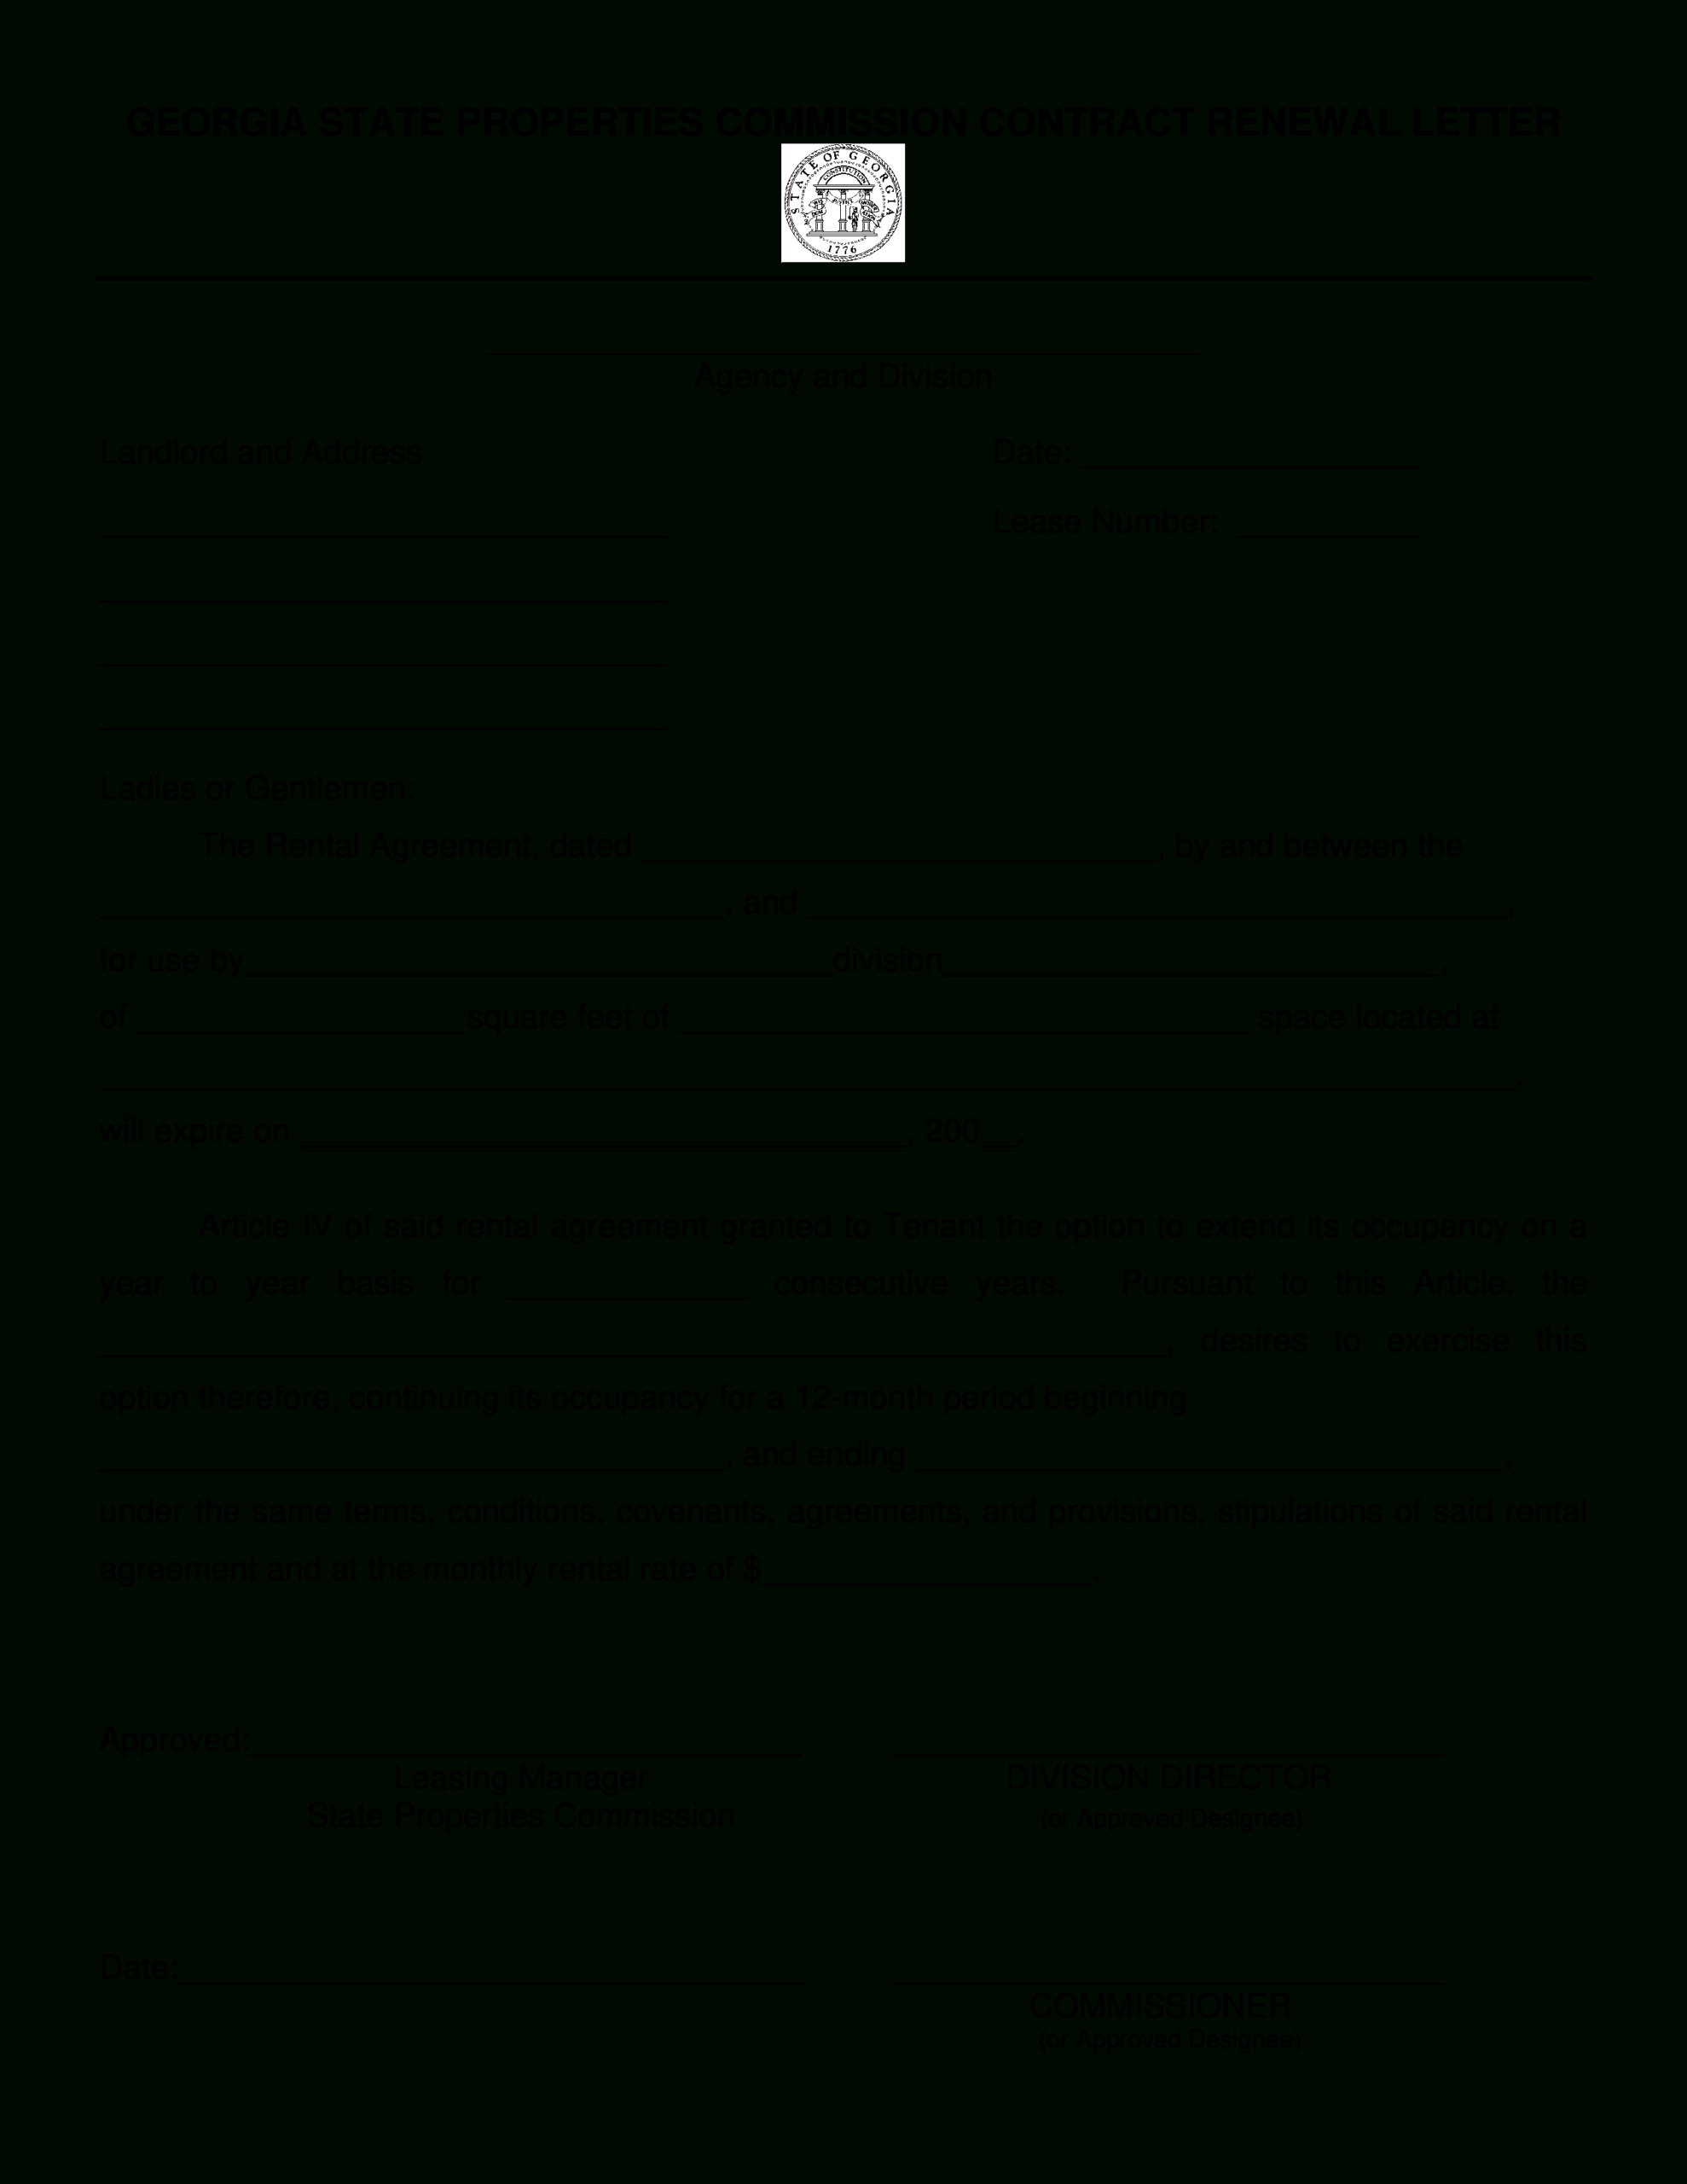 Employment Contract Renewal Application Letter | Templates Pertaining To 407 Letter Template